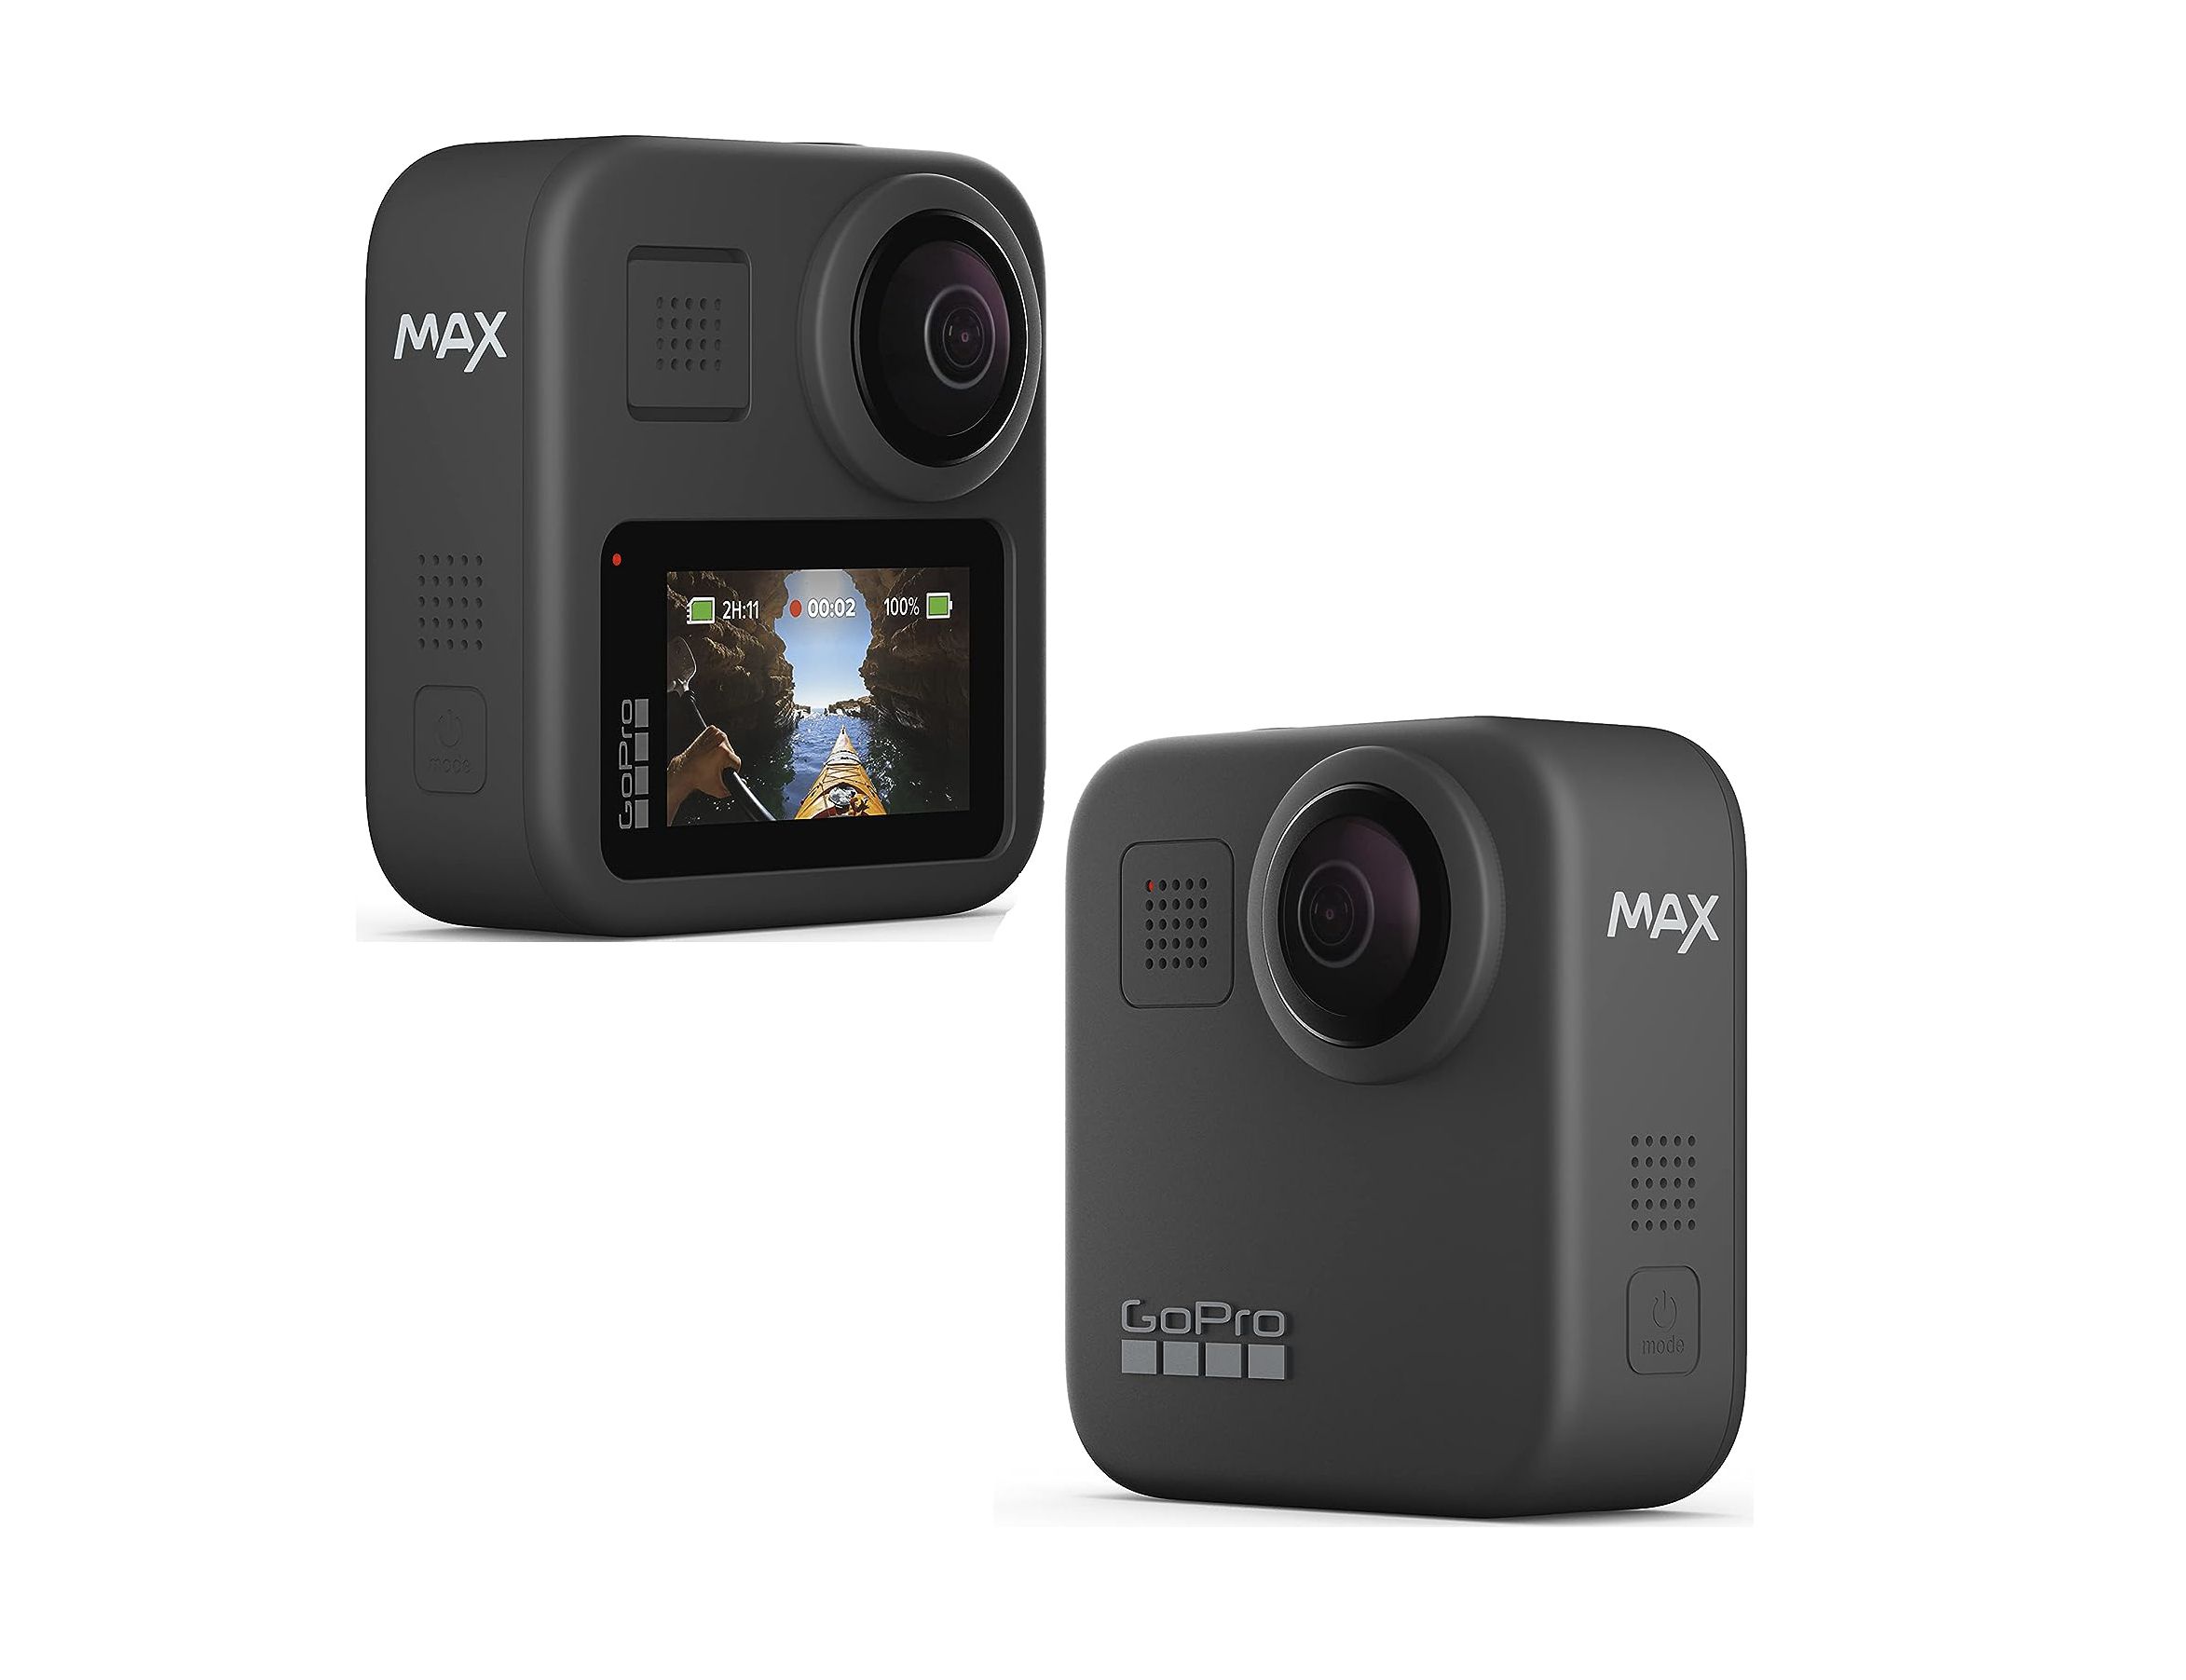 GoPro MAX 2.0 teased as new 360-degree camera and GoPro Max successor